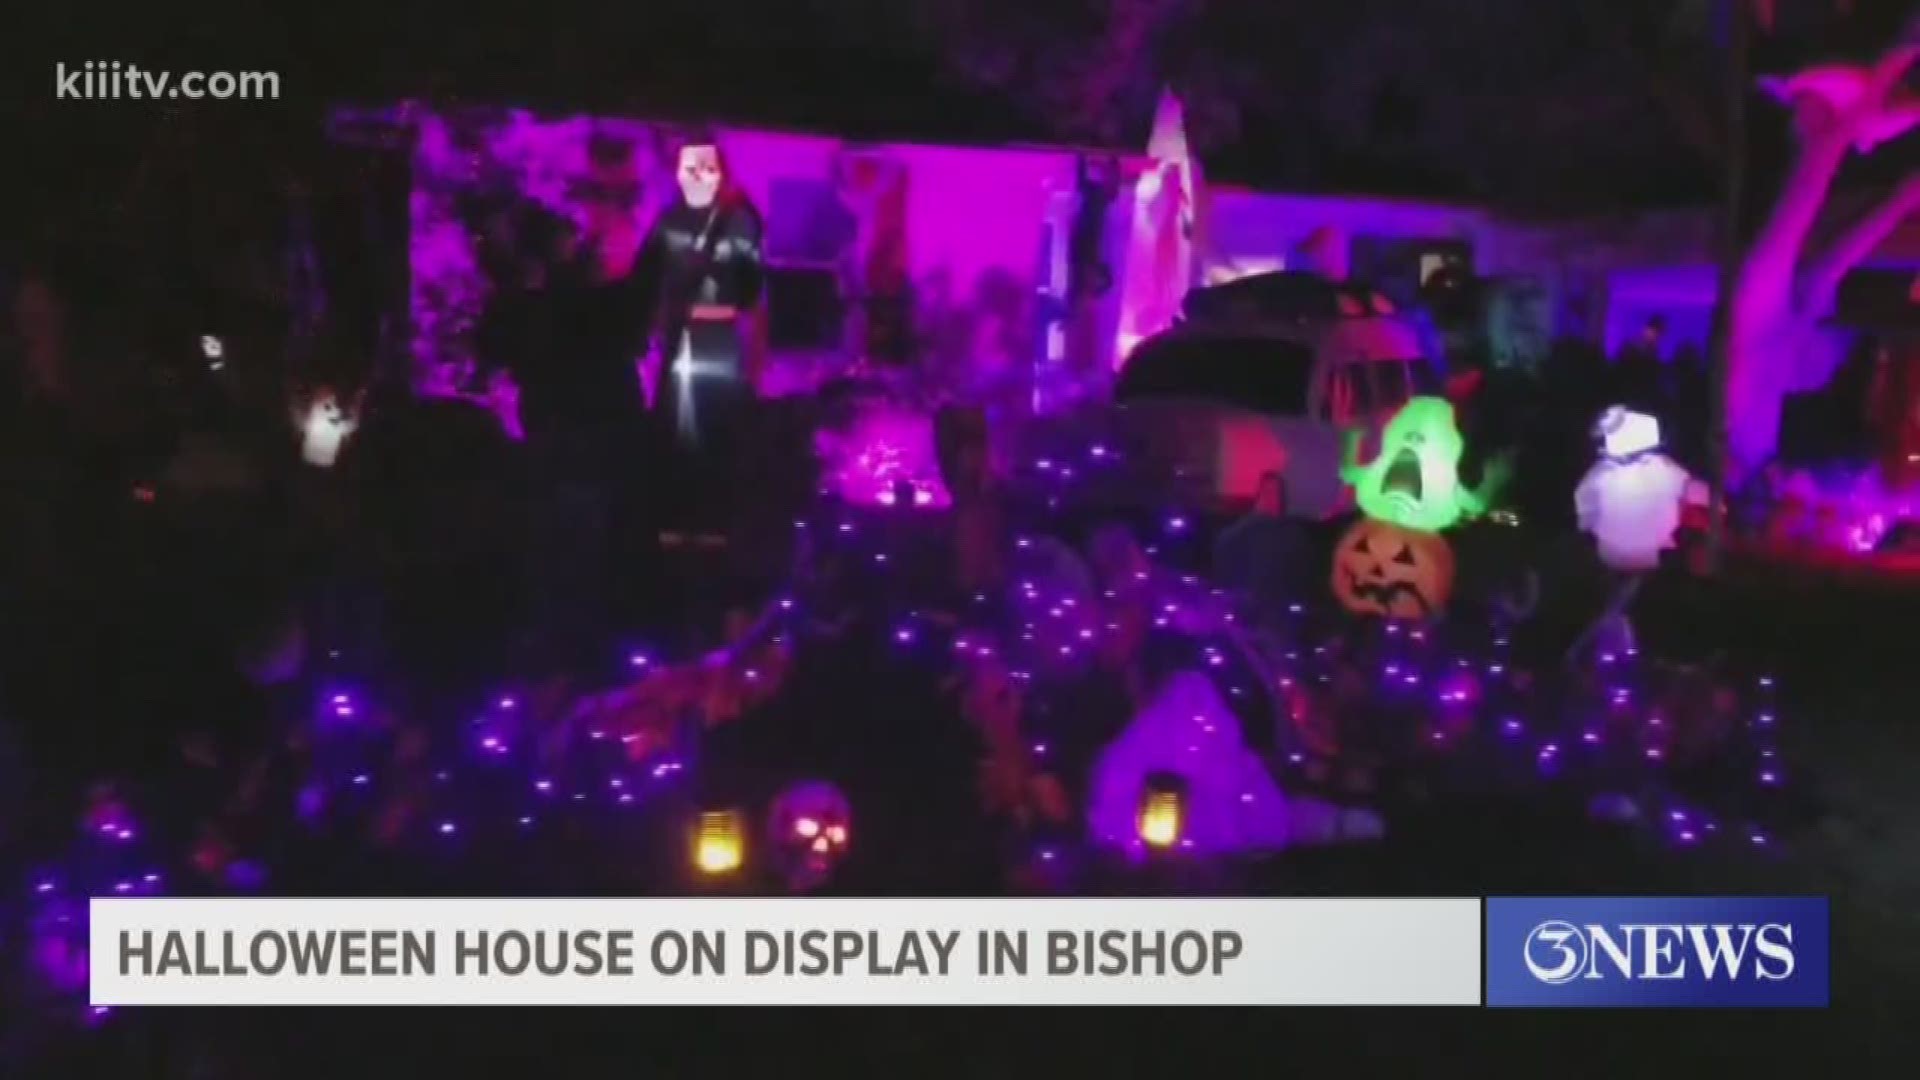 A family in Bishop is getting into the Halloween spirit with a Ghostbusters theme.